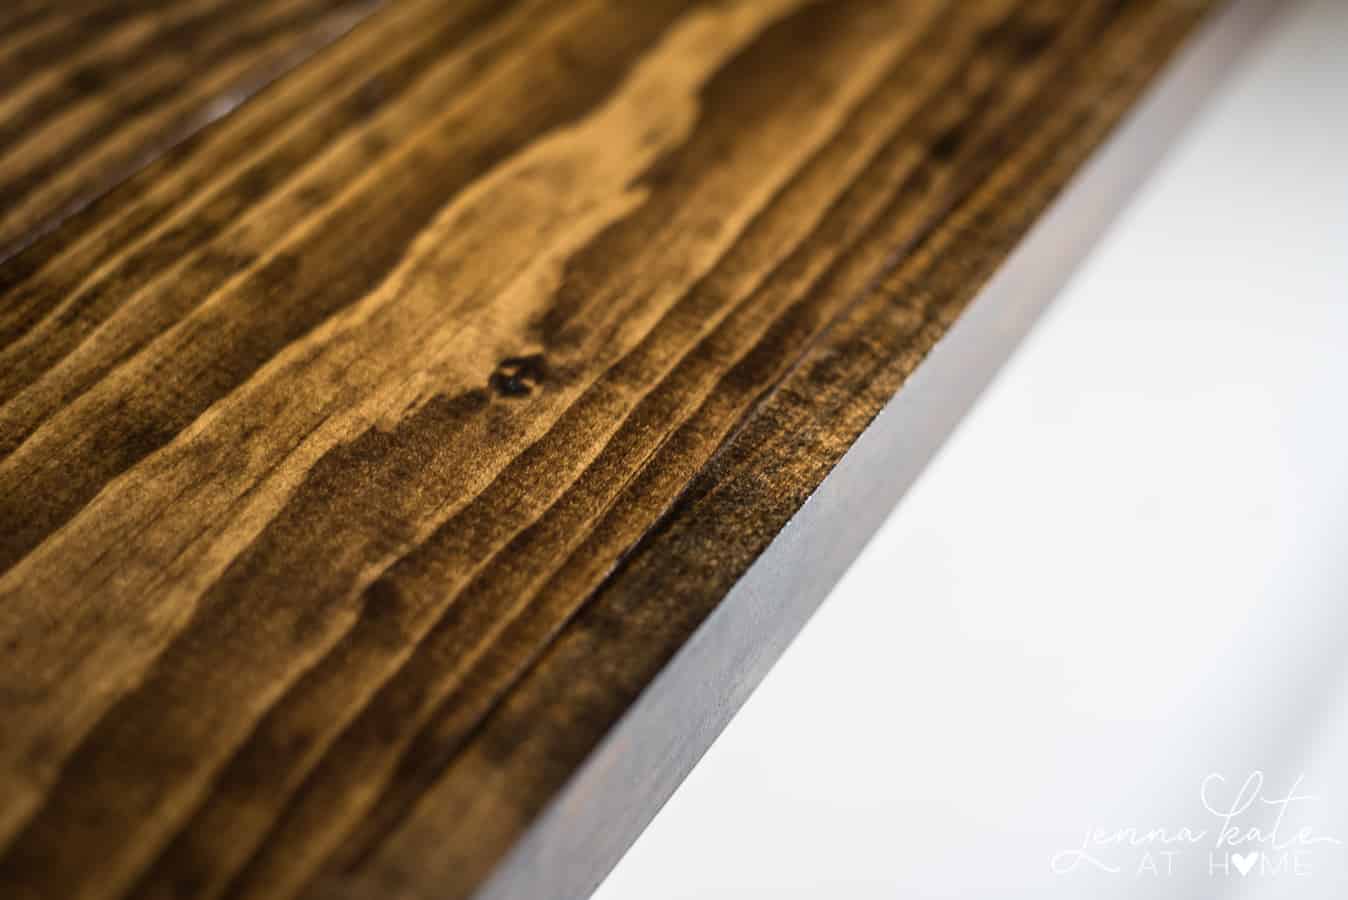 A close-up view of the wood details of the DIY wide plank butcher block countertops 